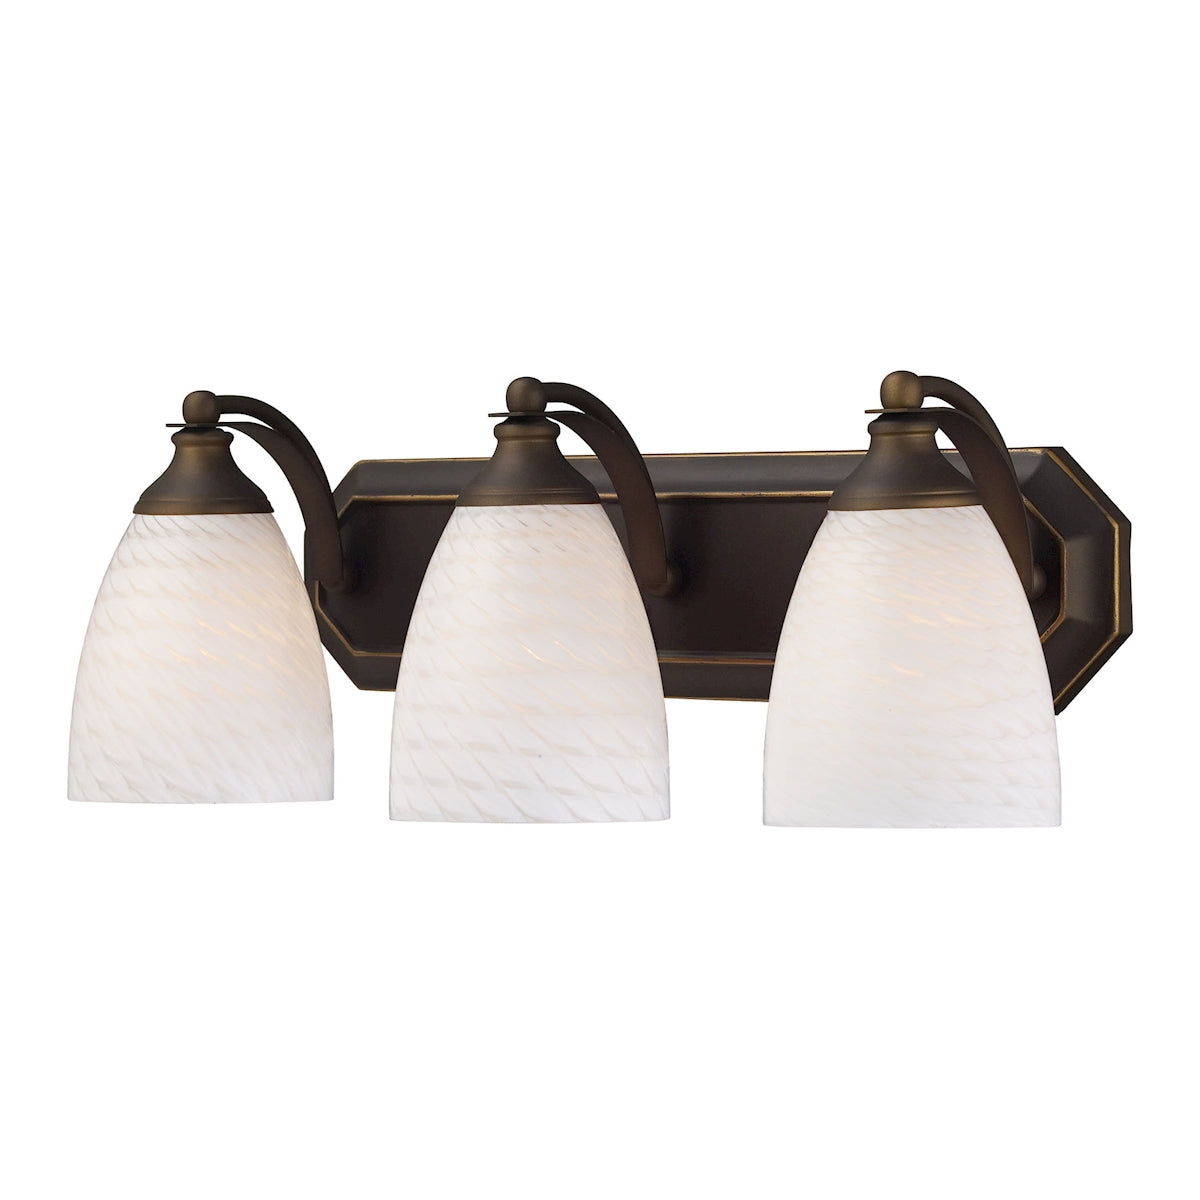 ELK Lighting 570-3B-WS Mix-N-Match Vanity 3-Light Wall Lamp in Aged Bronze with White Swirl Glass